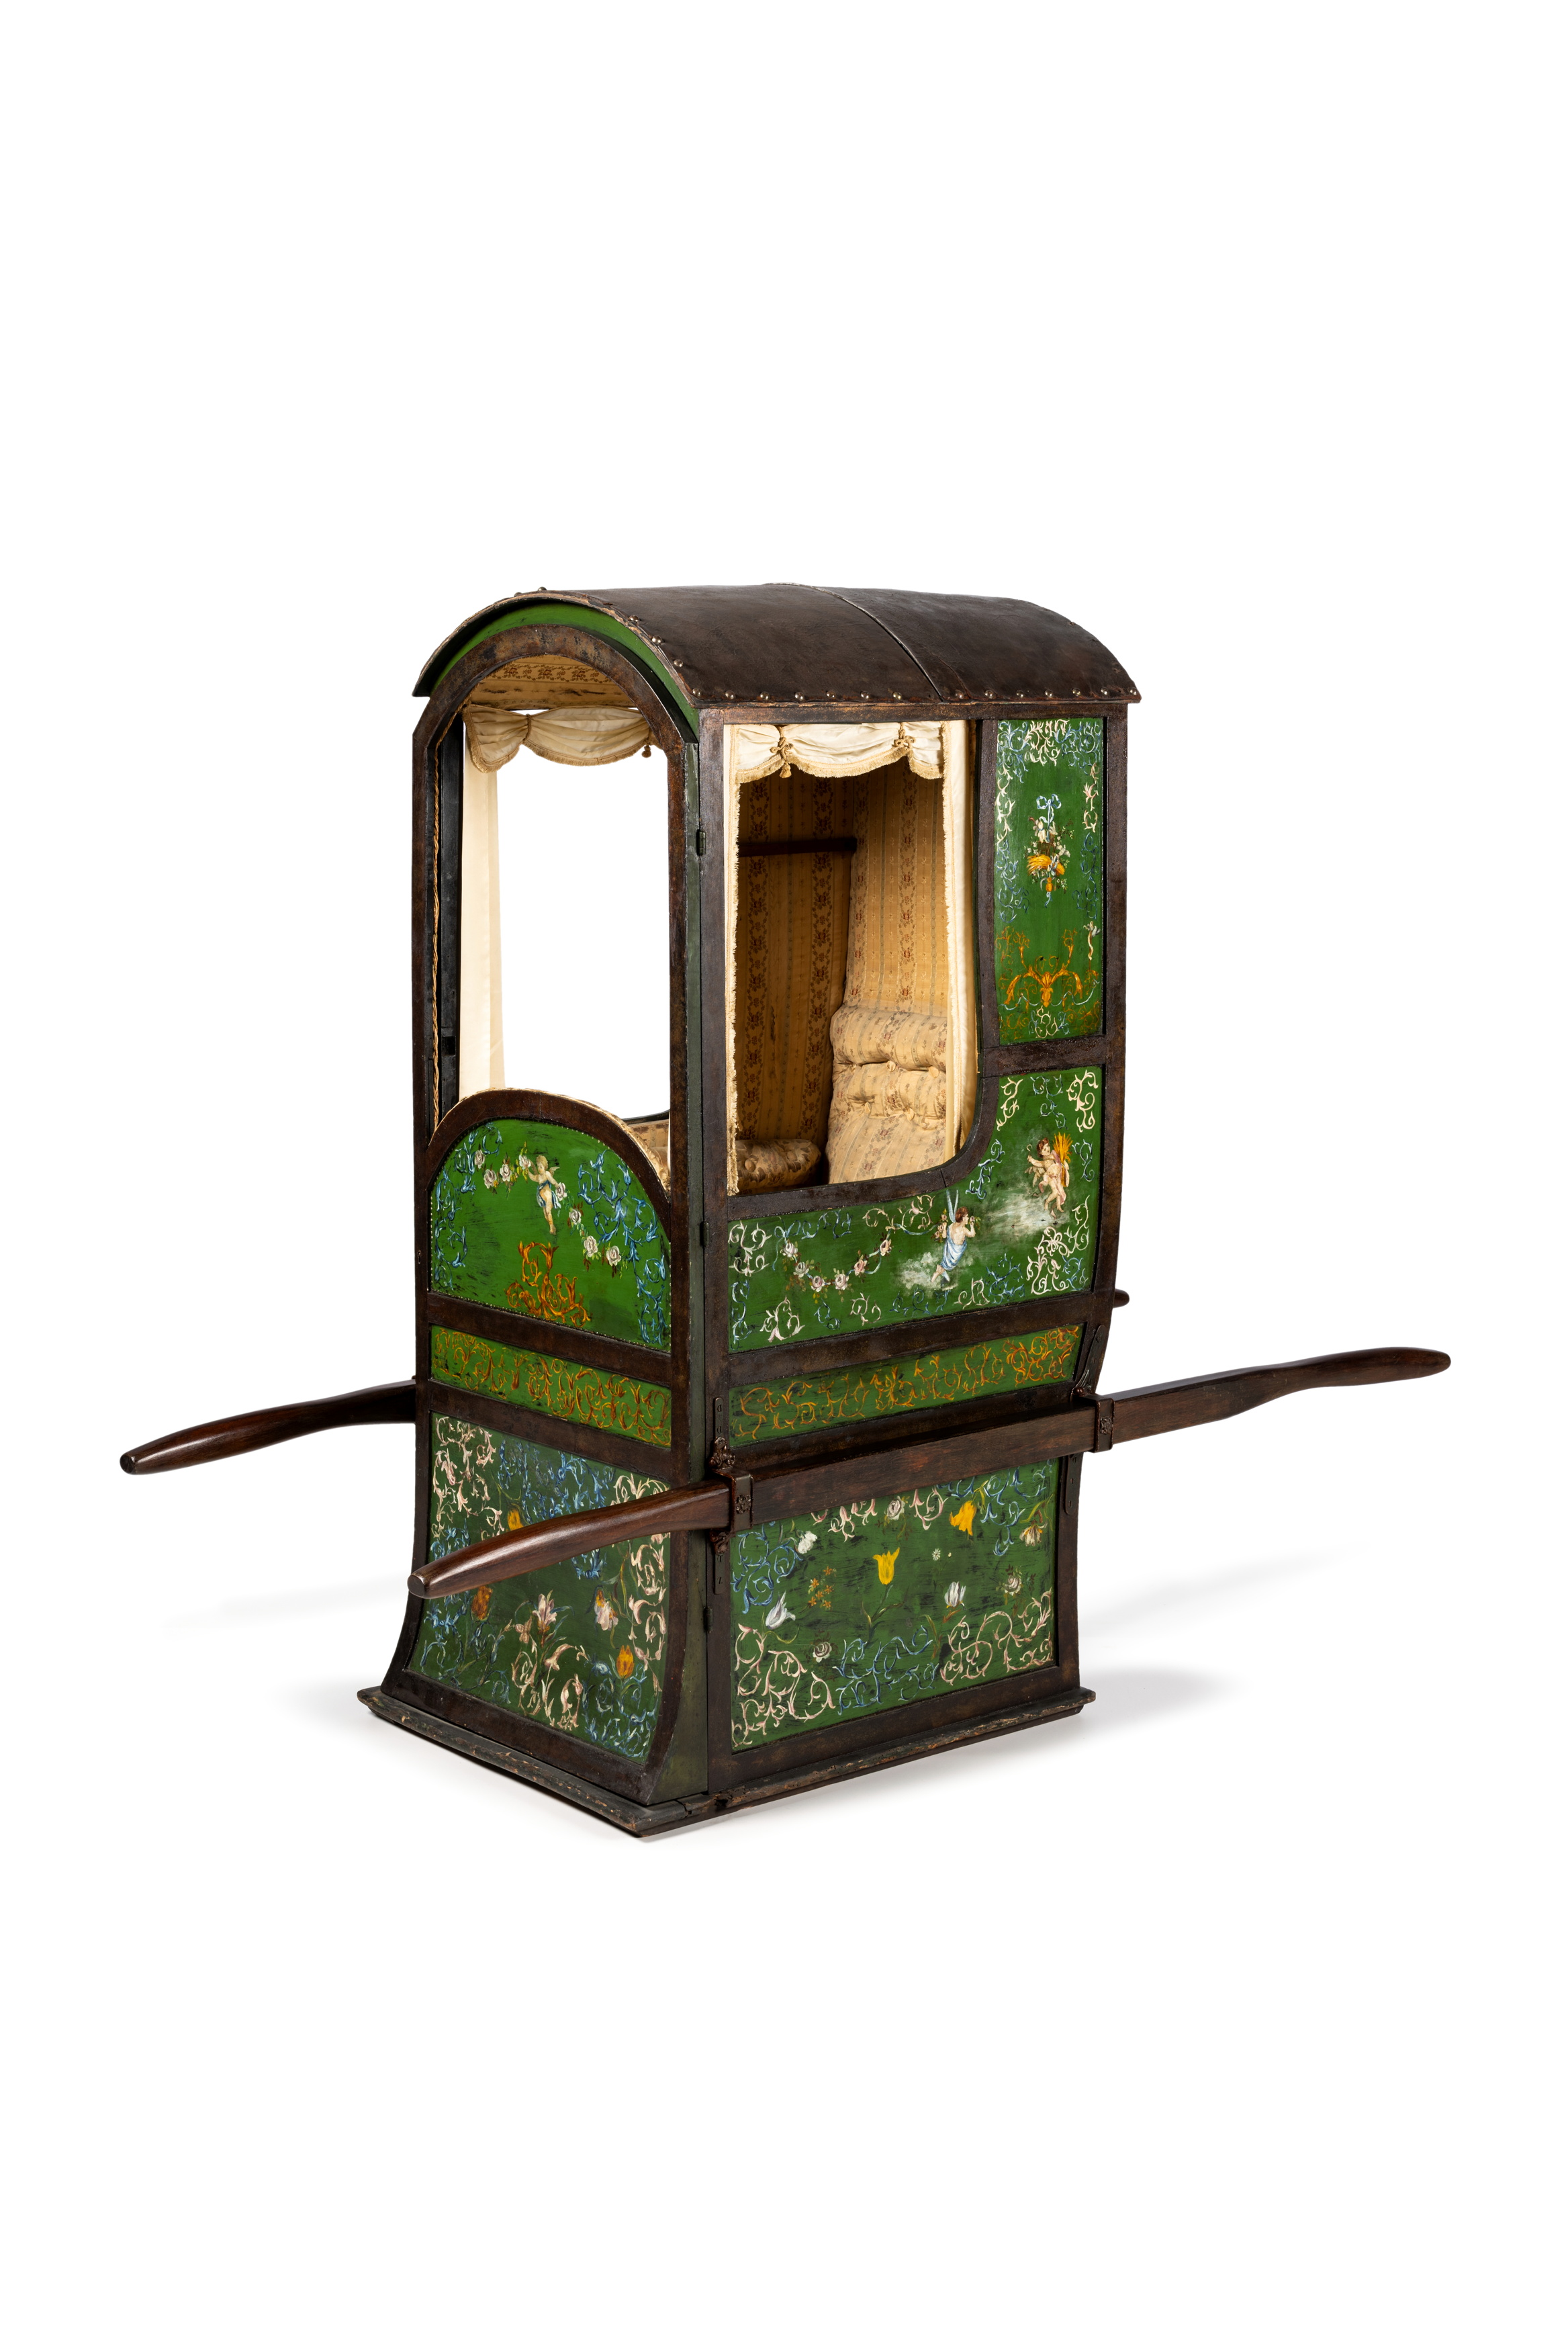 Sedan chair used as telephone box owned by F A P Hyland